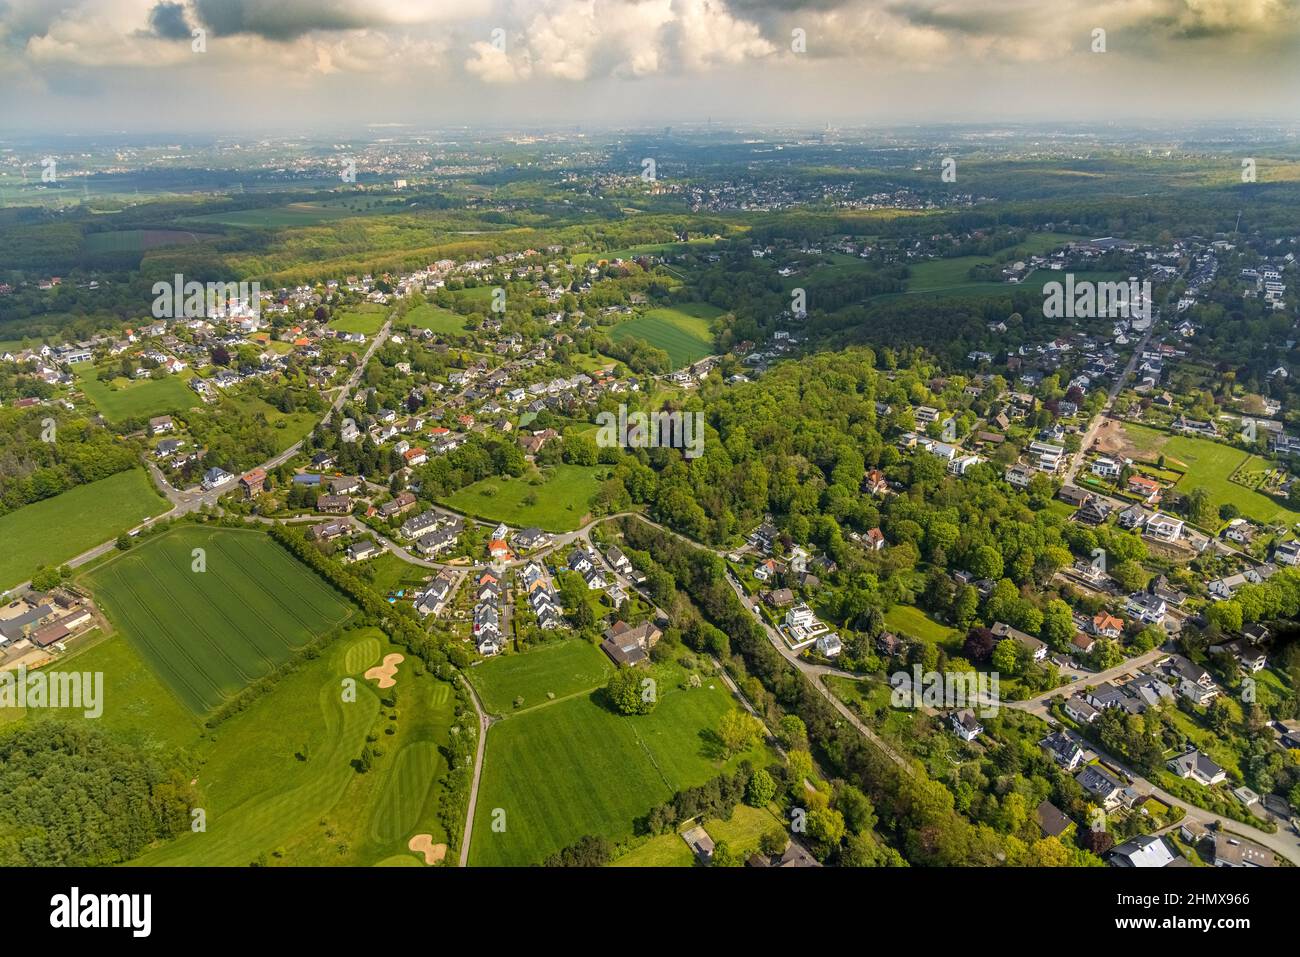 Aerial View, Golf Course Golfing in Herdecke, Local View Ahlenberg, Herdecke, Ruhr Area, North Rhine-Westphalia, Germany, DE, Europe, Golf, Golf Cours Stock Photo